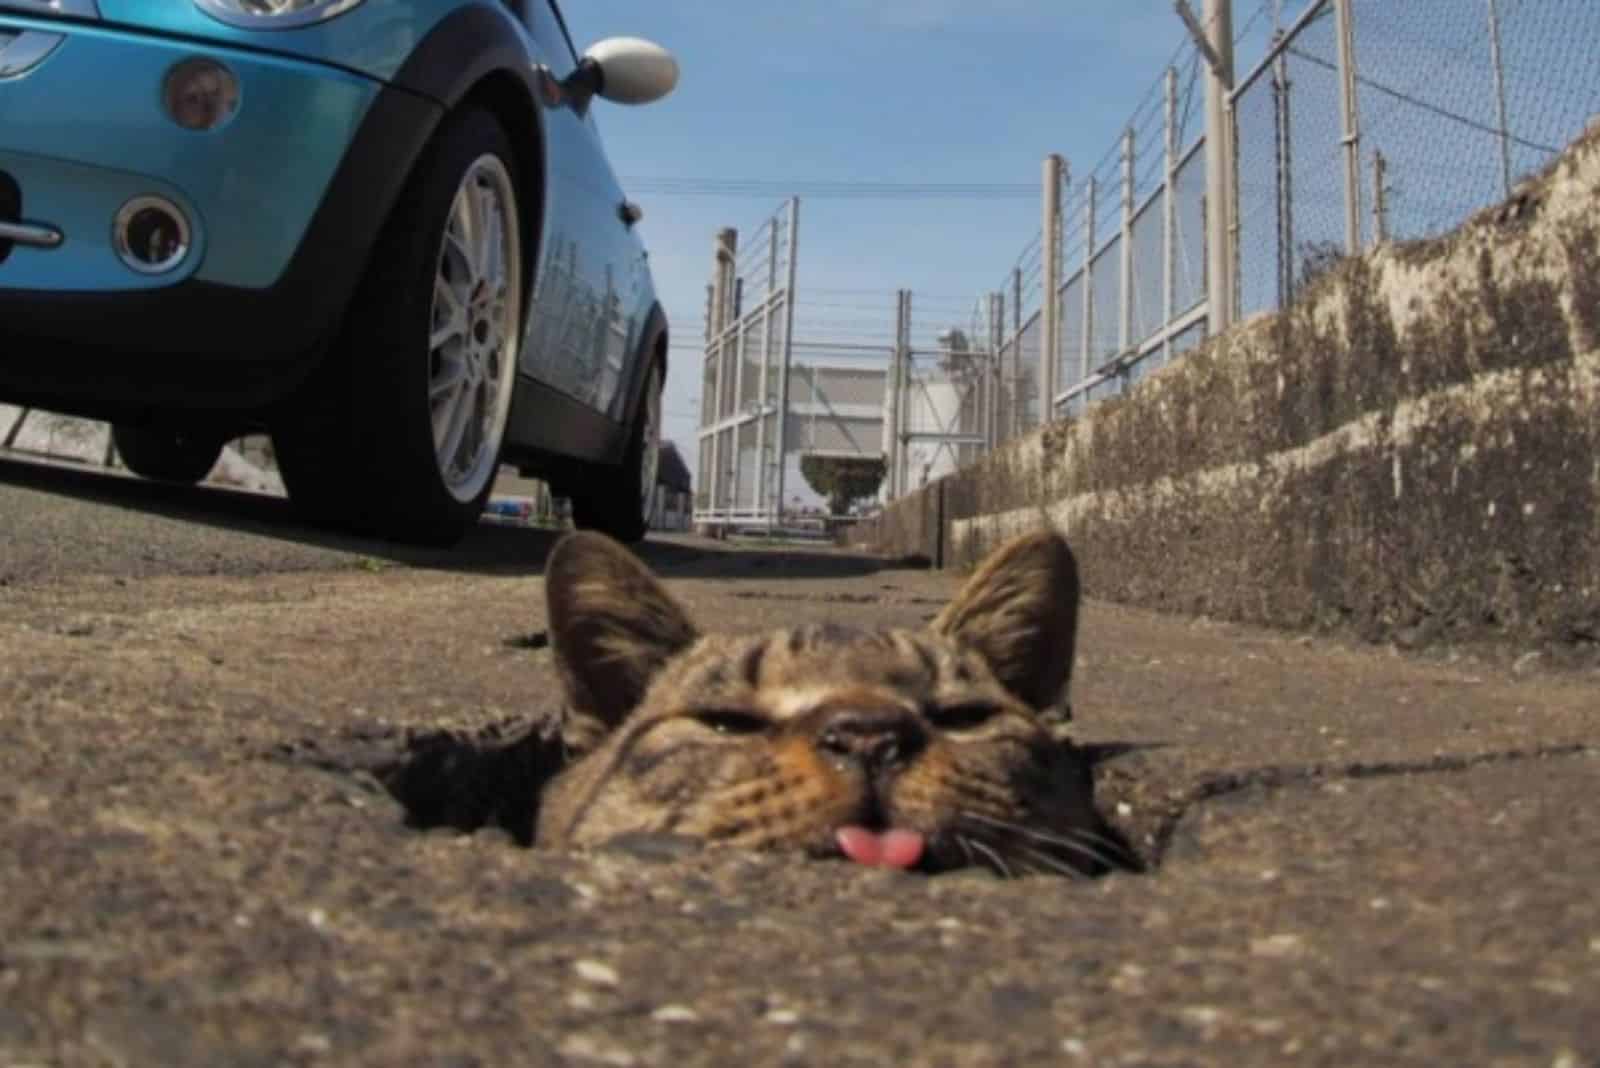 stray cat peeking out of a hole in the pavement and sticking tongue out